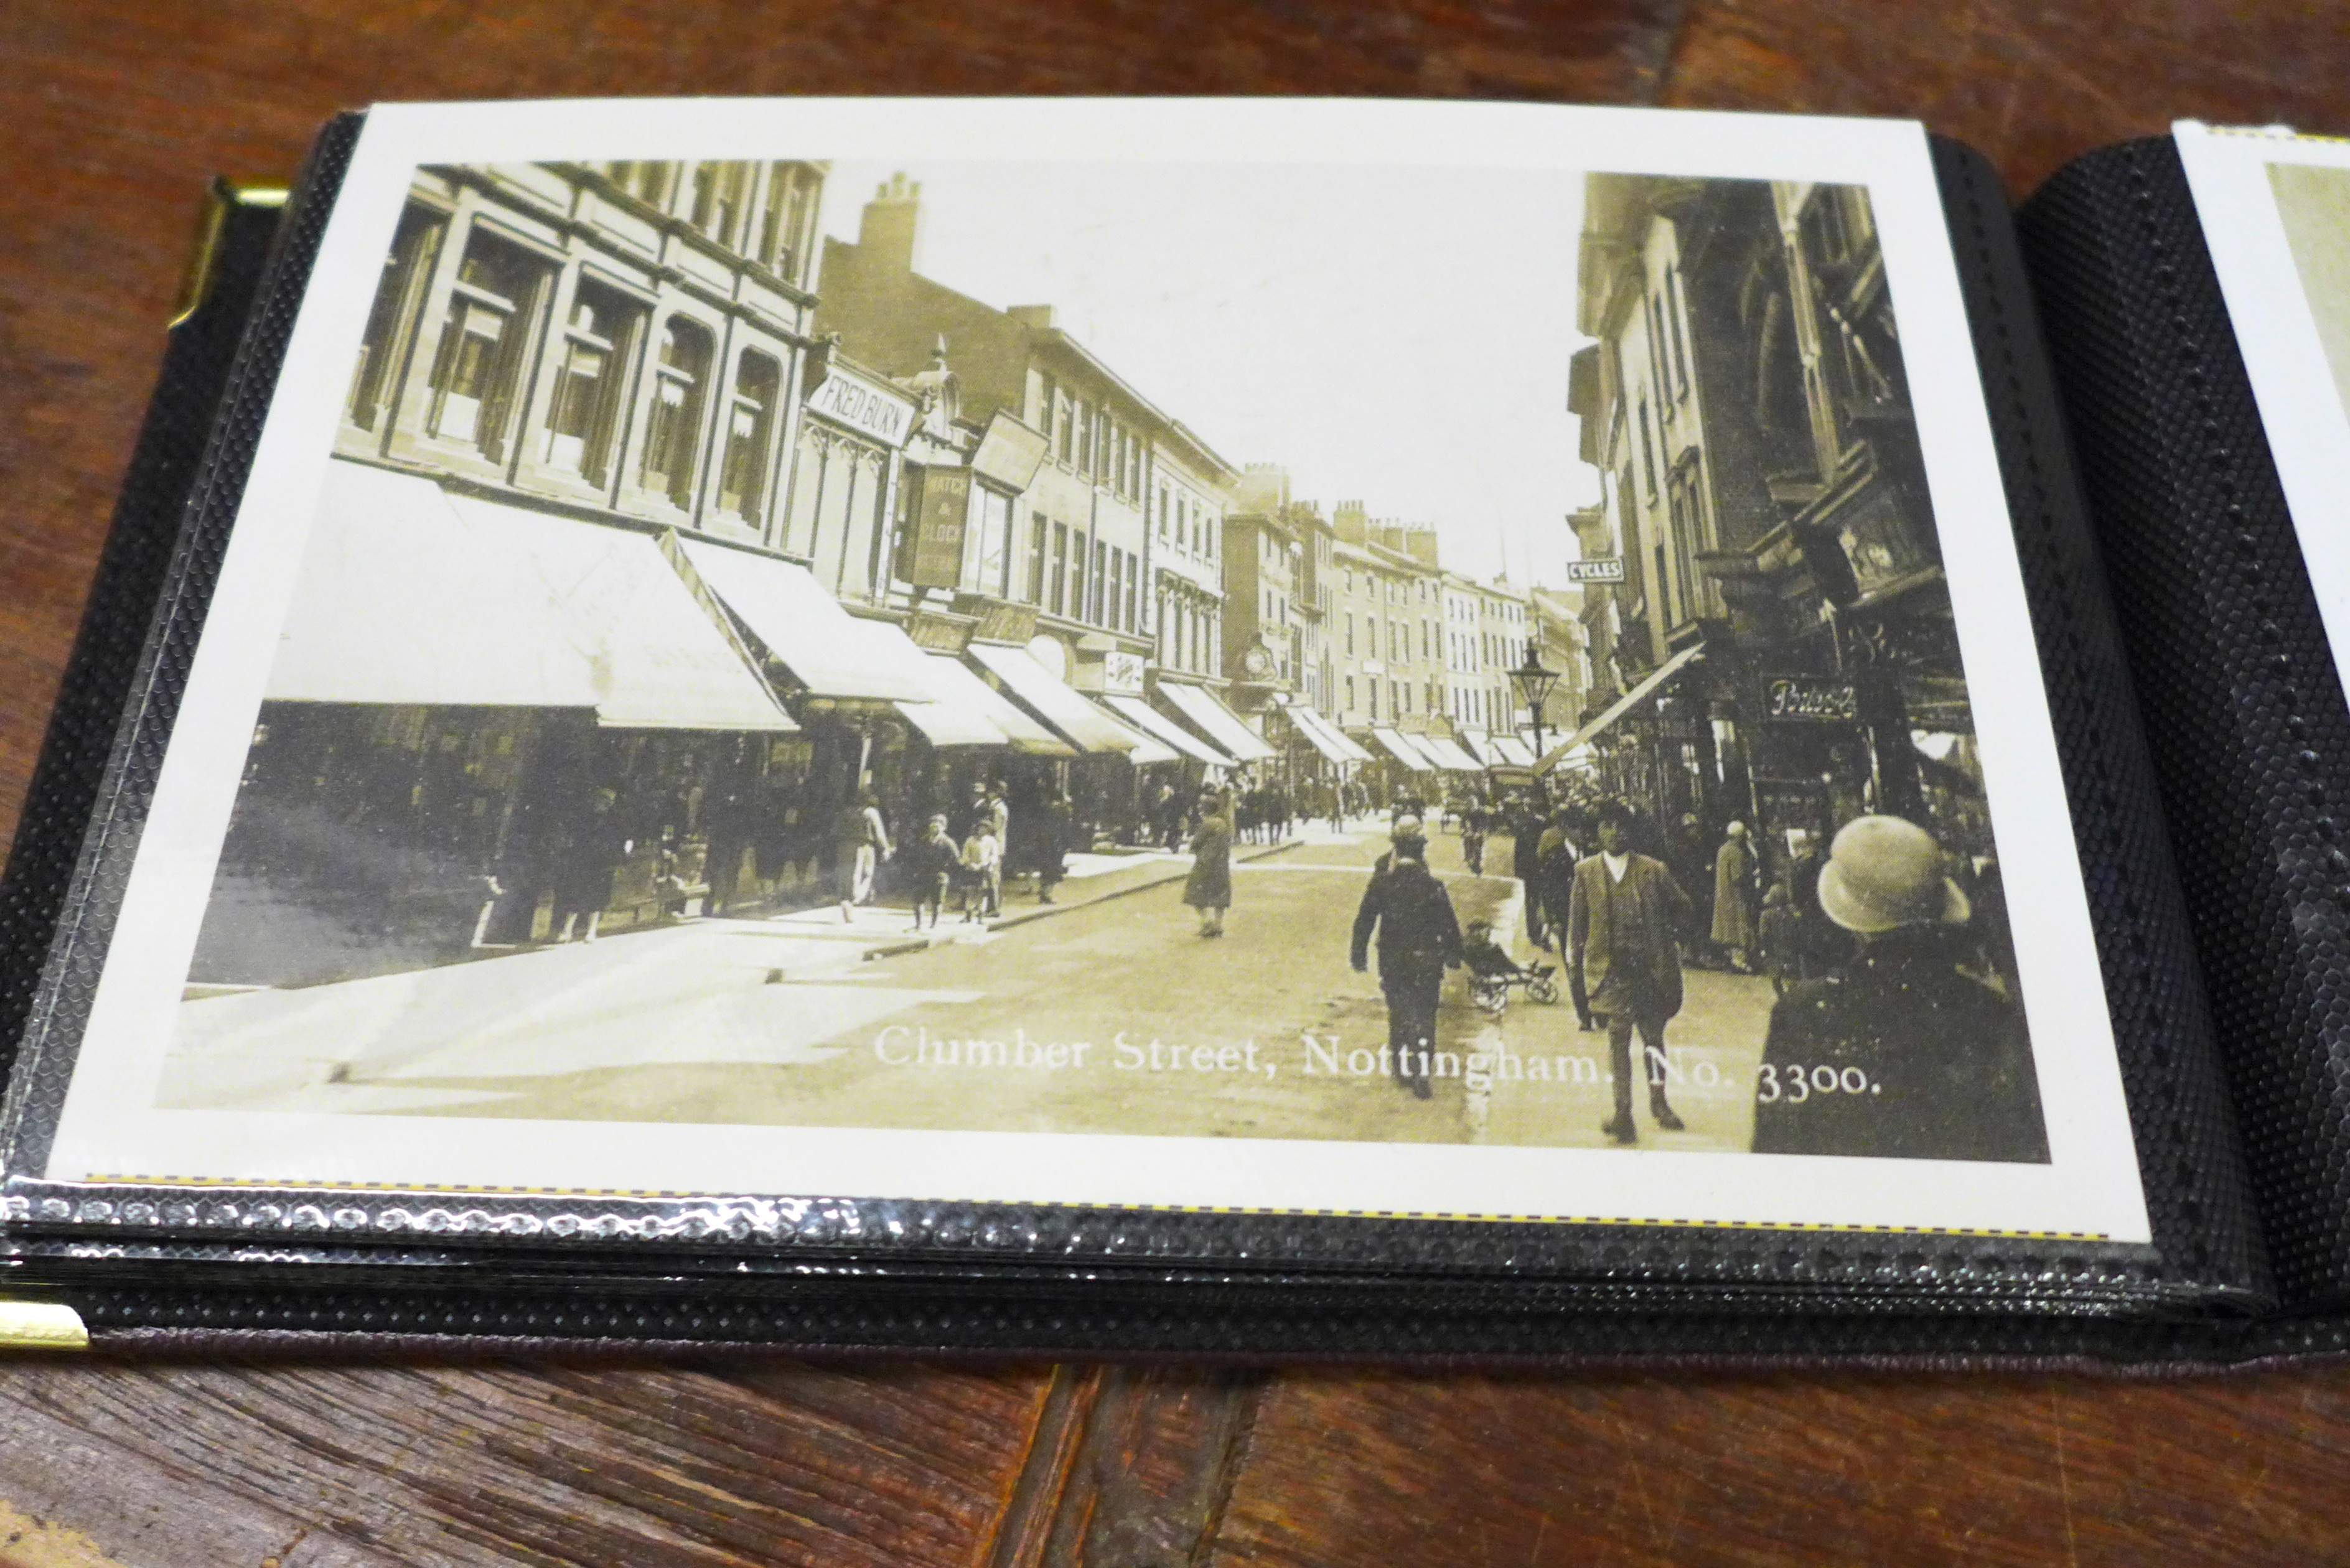 Nottingham postcards, cigarette cards and two lacquered boxes, for gloves and hankies - Image 5 of 6